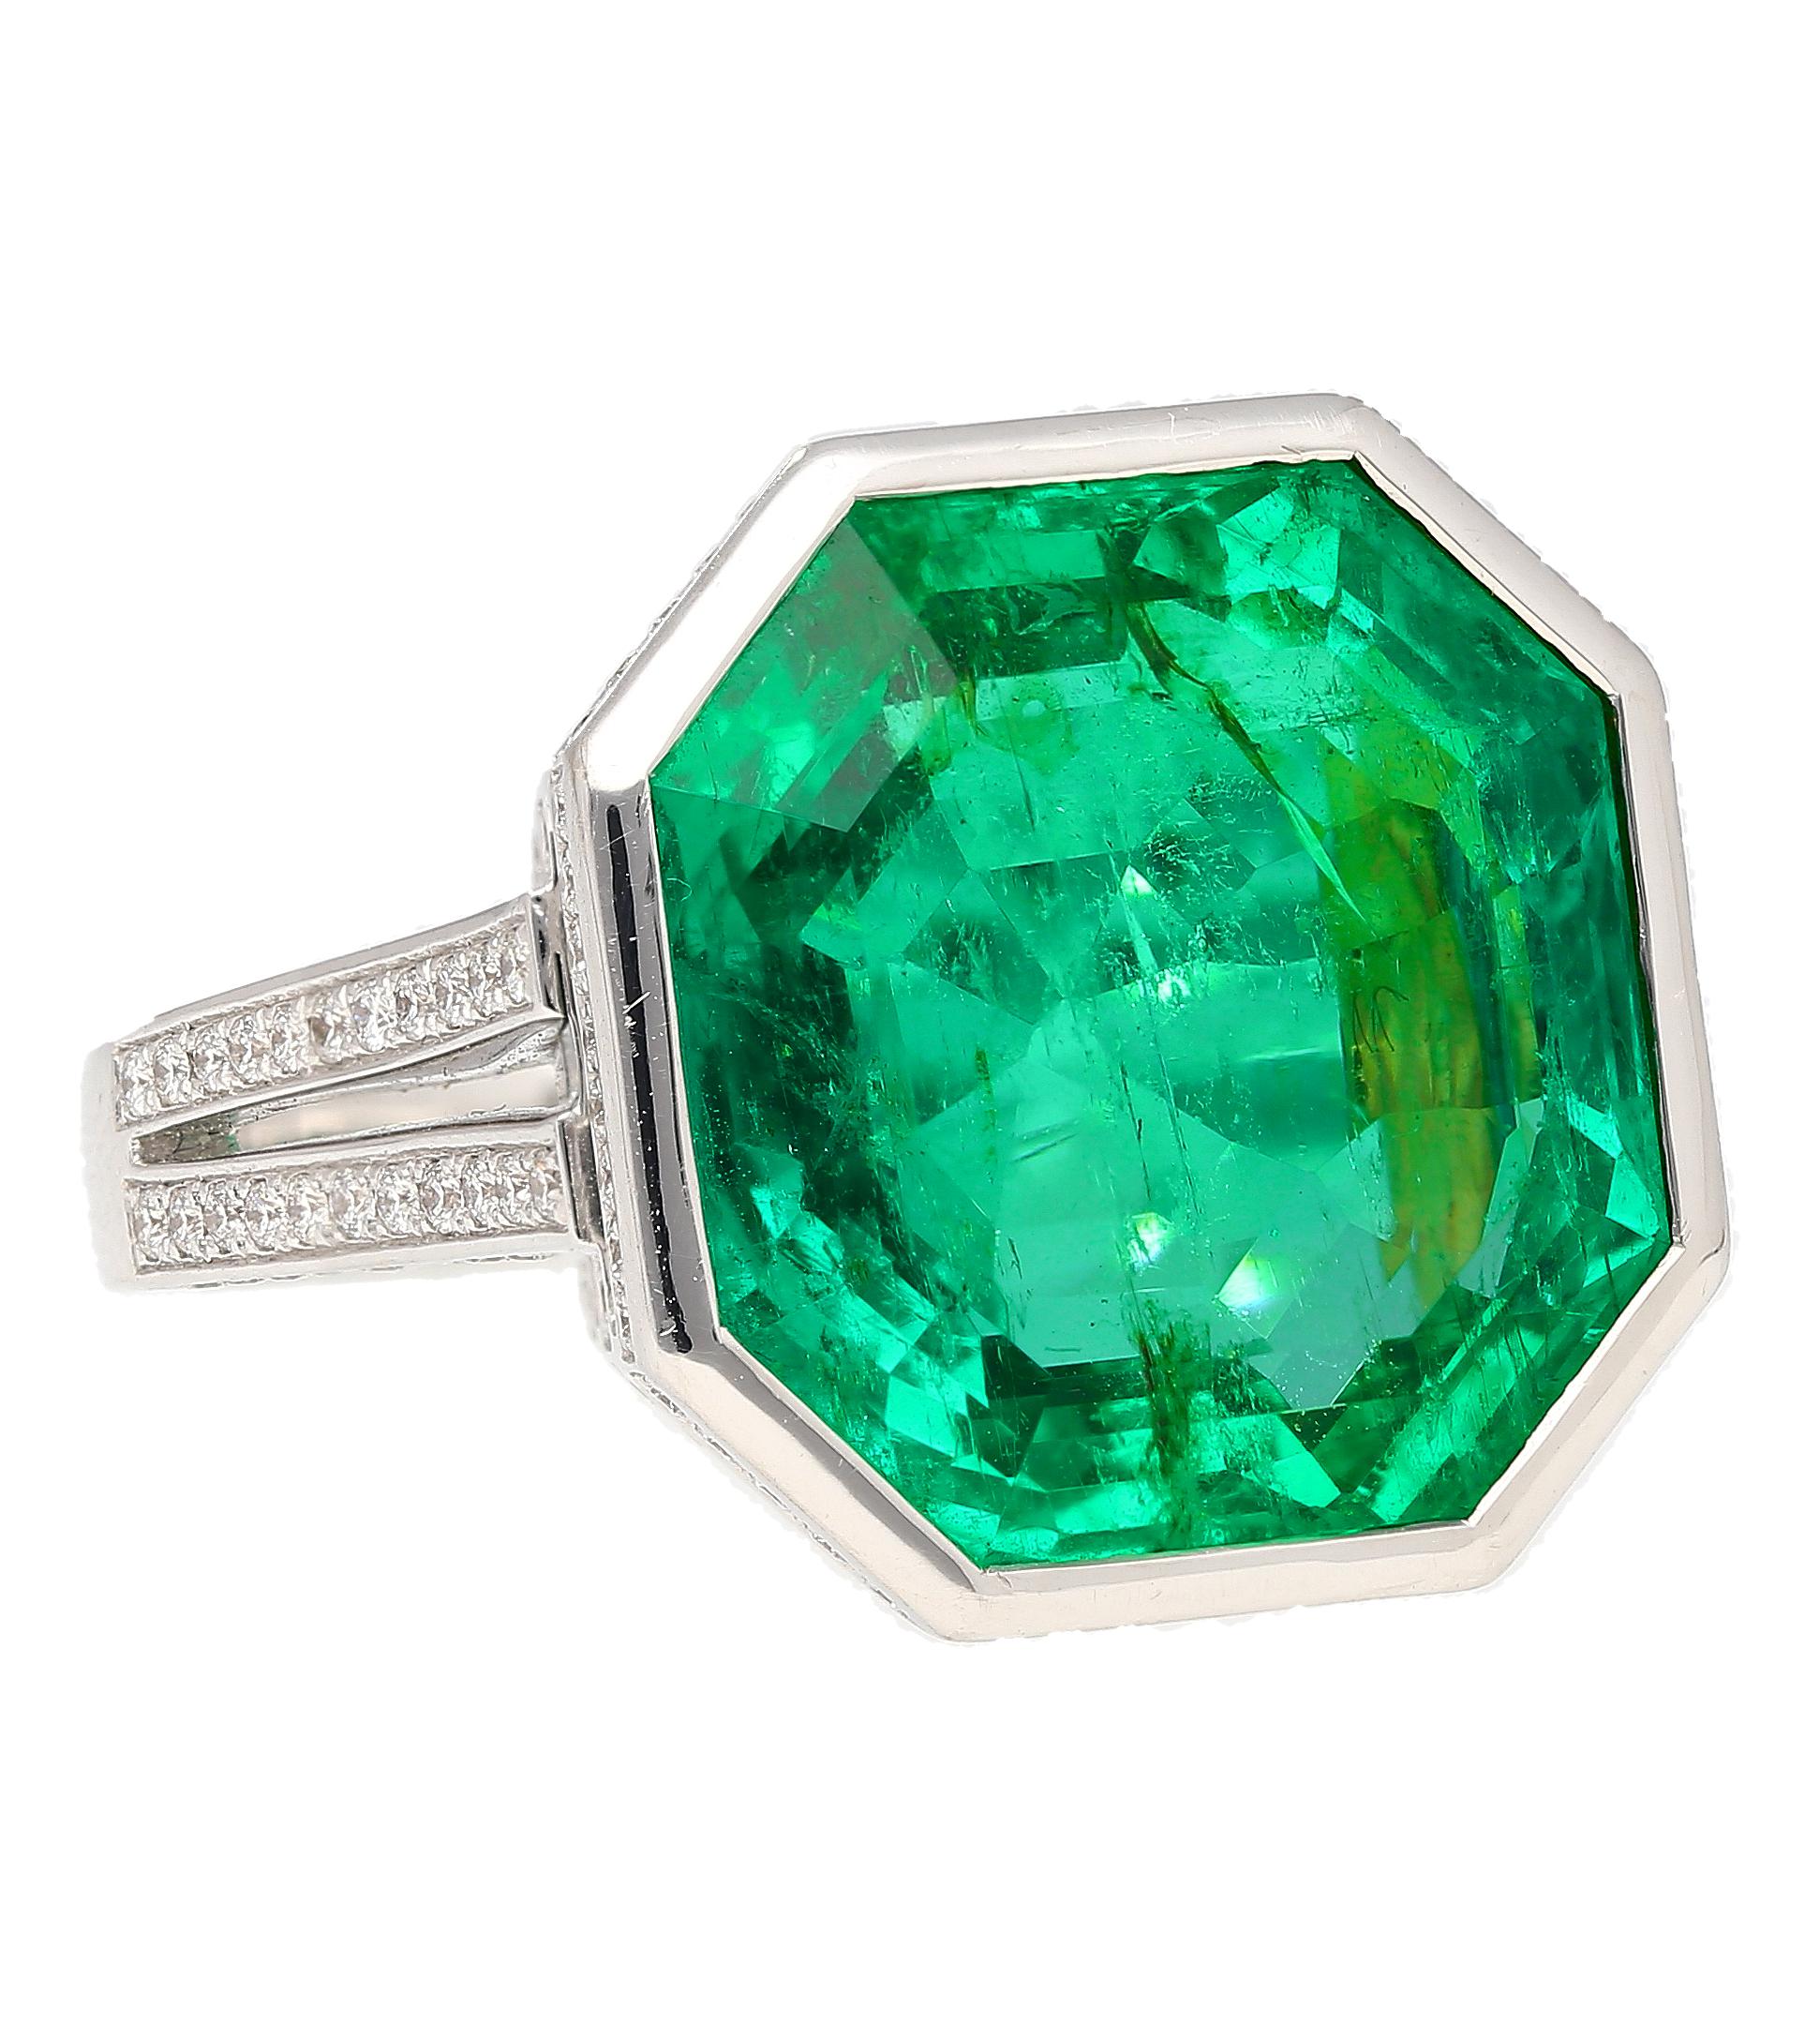 Experience the pinnacle of sophistication with our 17 Carat Octagonal Cut Colombian Emerald. AGL Certified minor oil. Set in flawless 18k white gold and adorned with a stunning array of natural round-cut diamonds, this investment-grade piece is